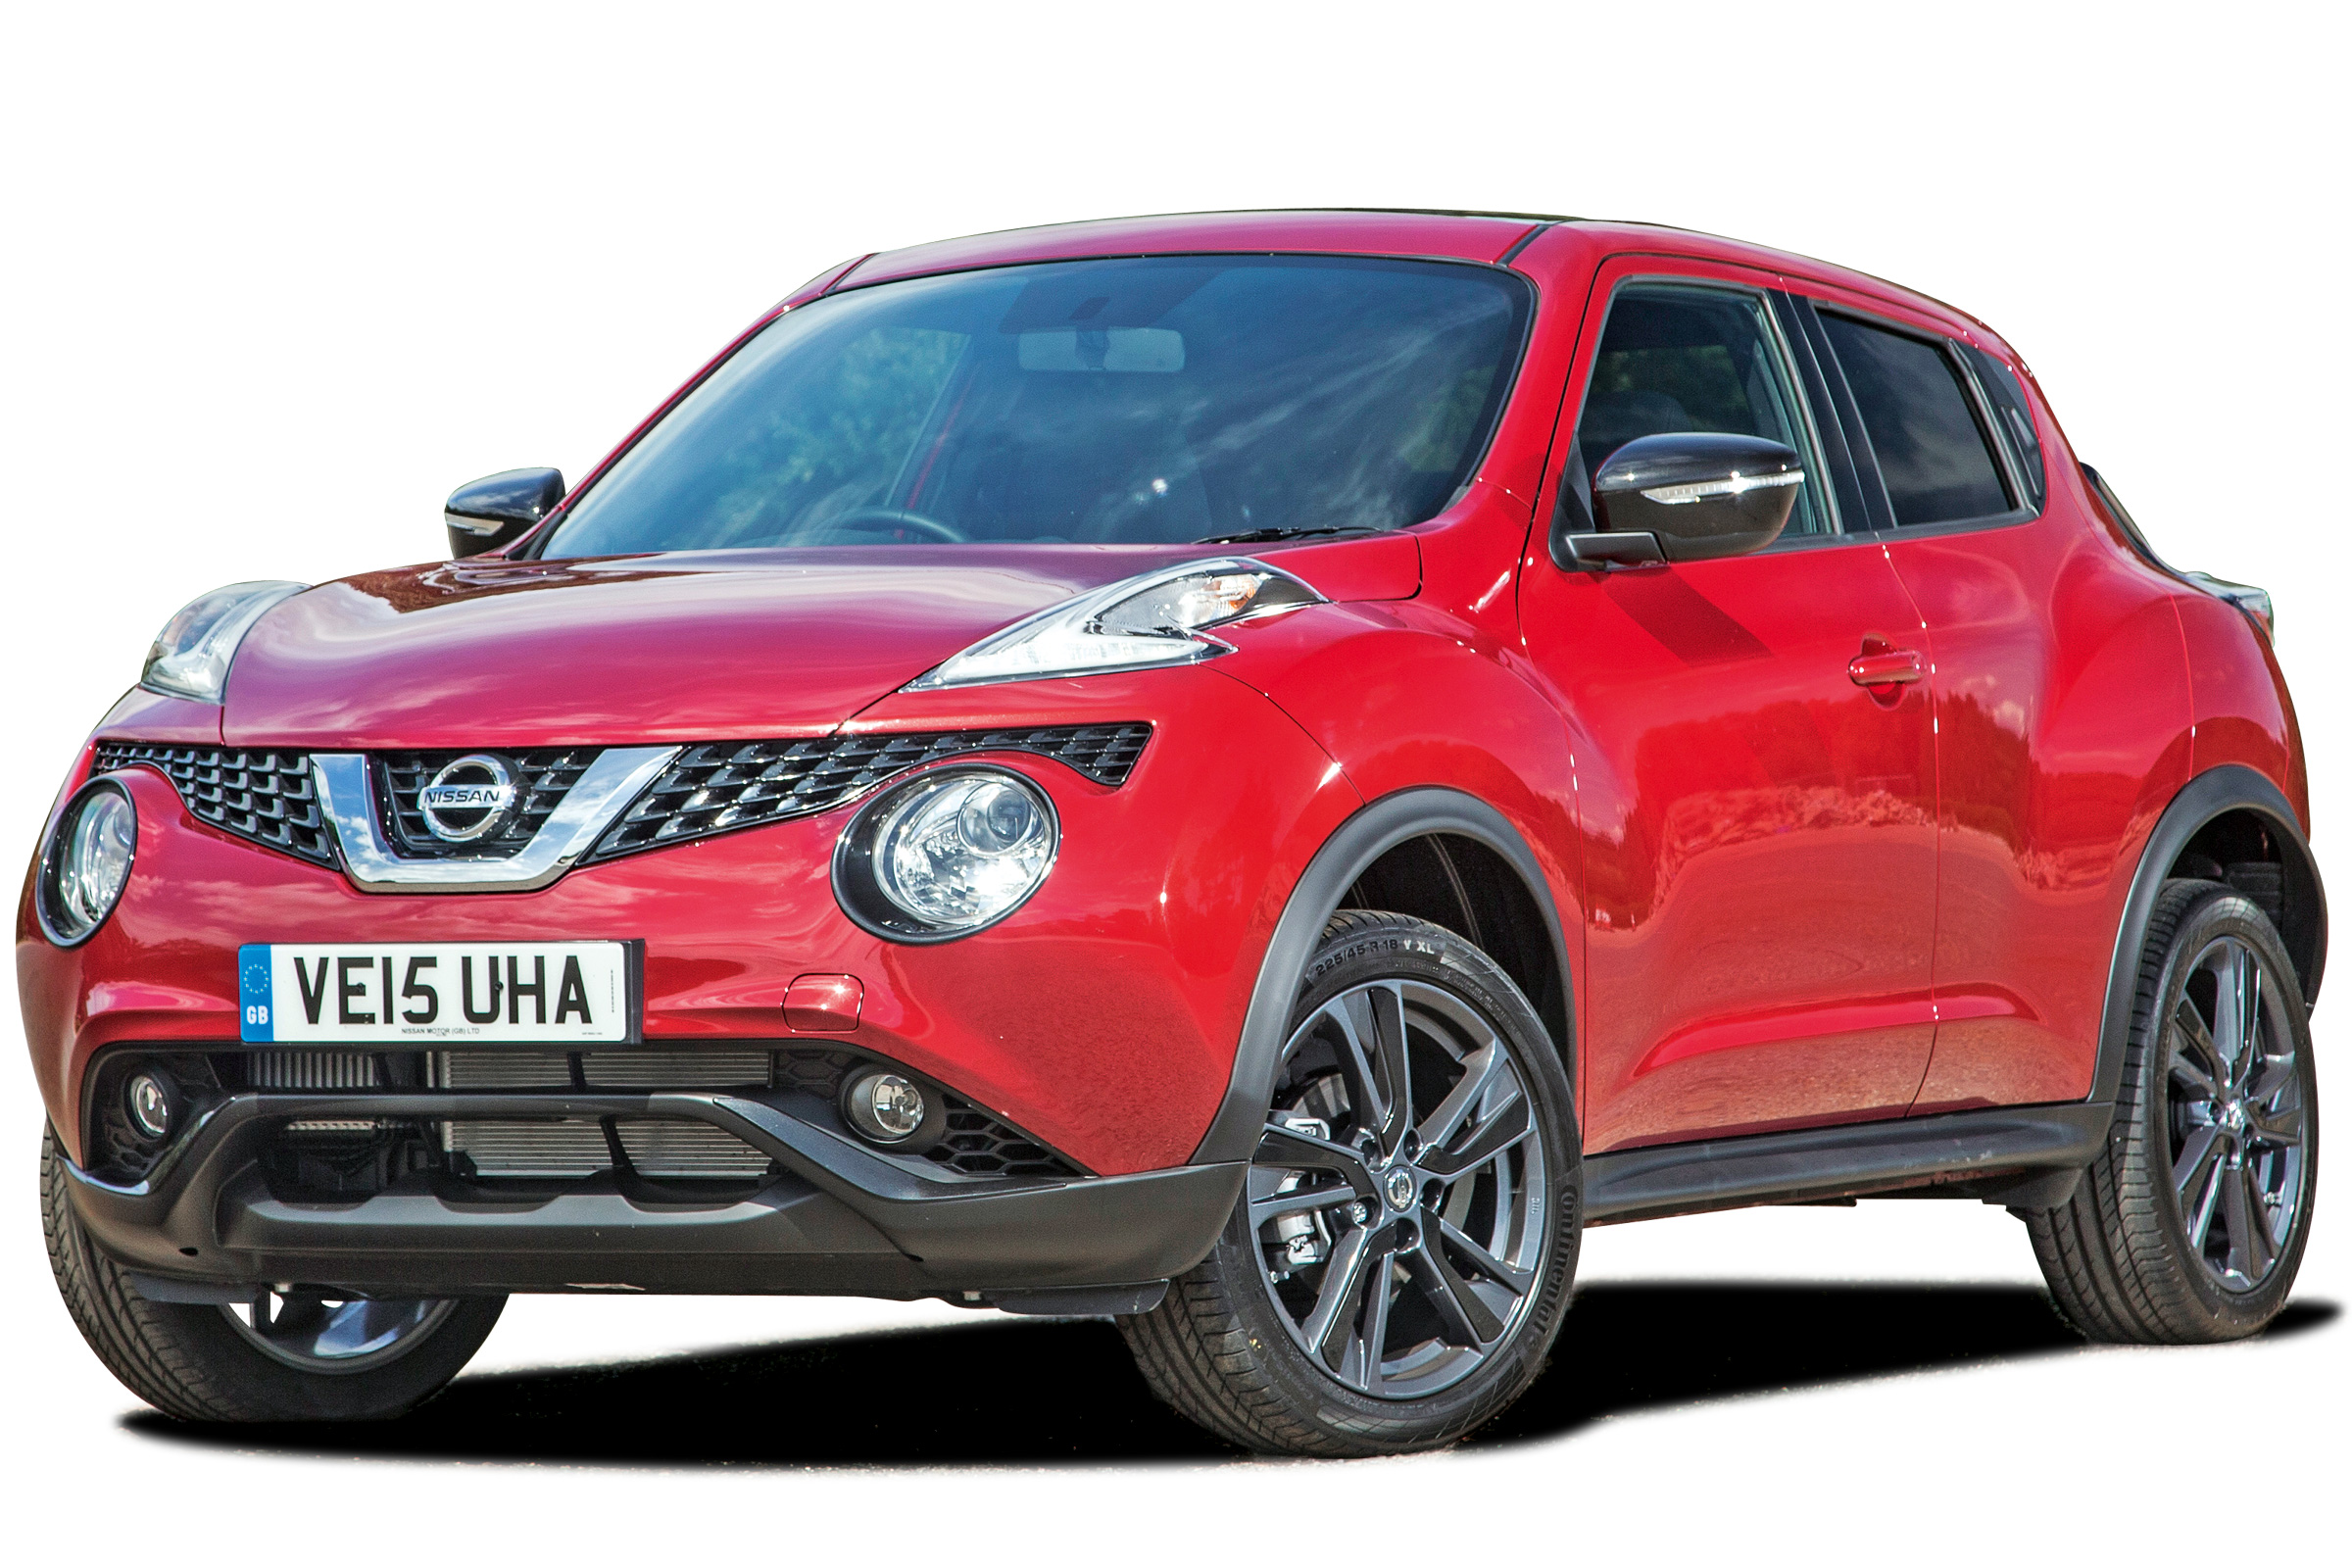 Nissan Juke Suv 10 19 Owner Reviews Mpg Problems Reliability Carbuyer